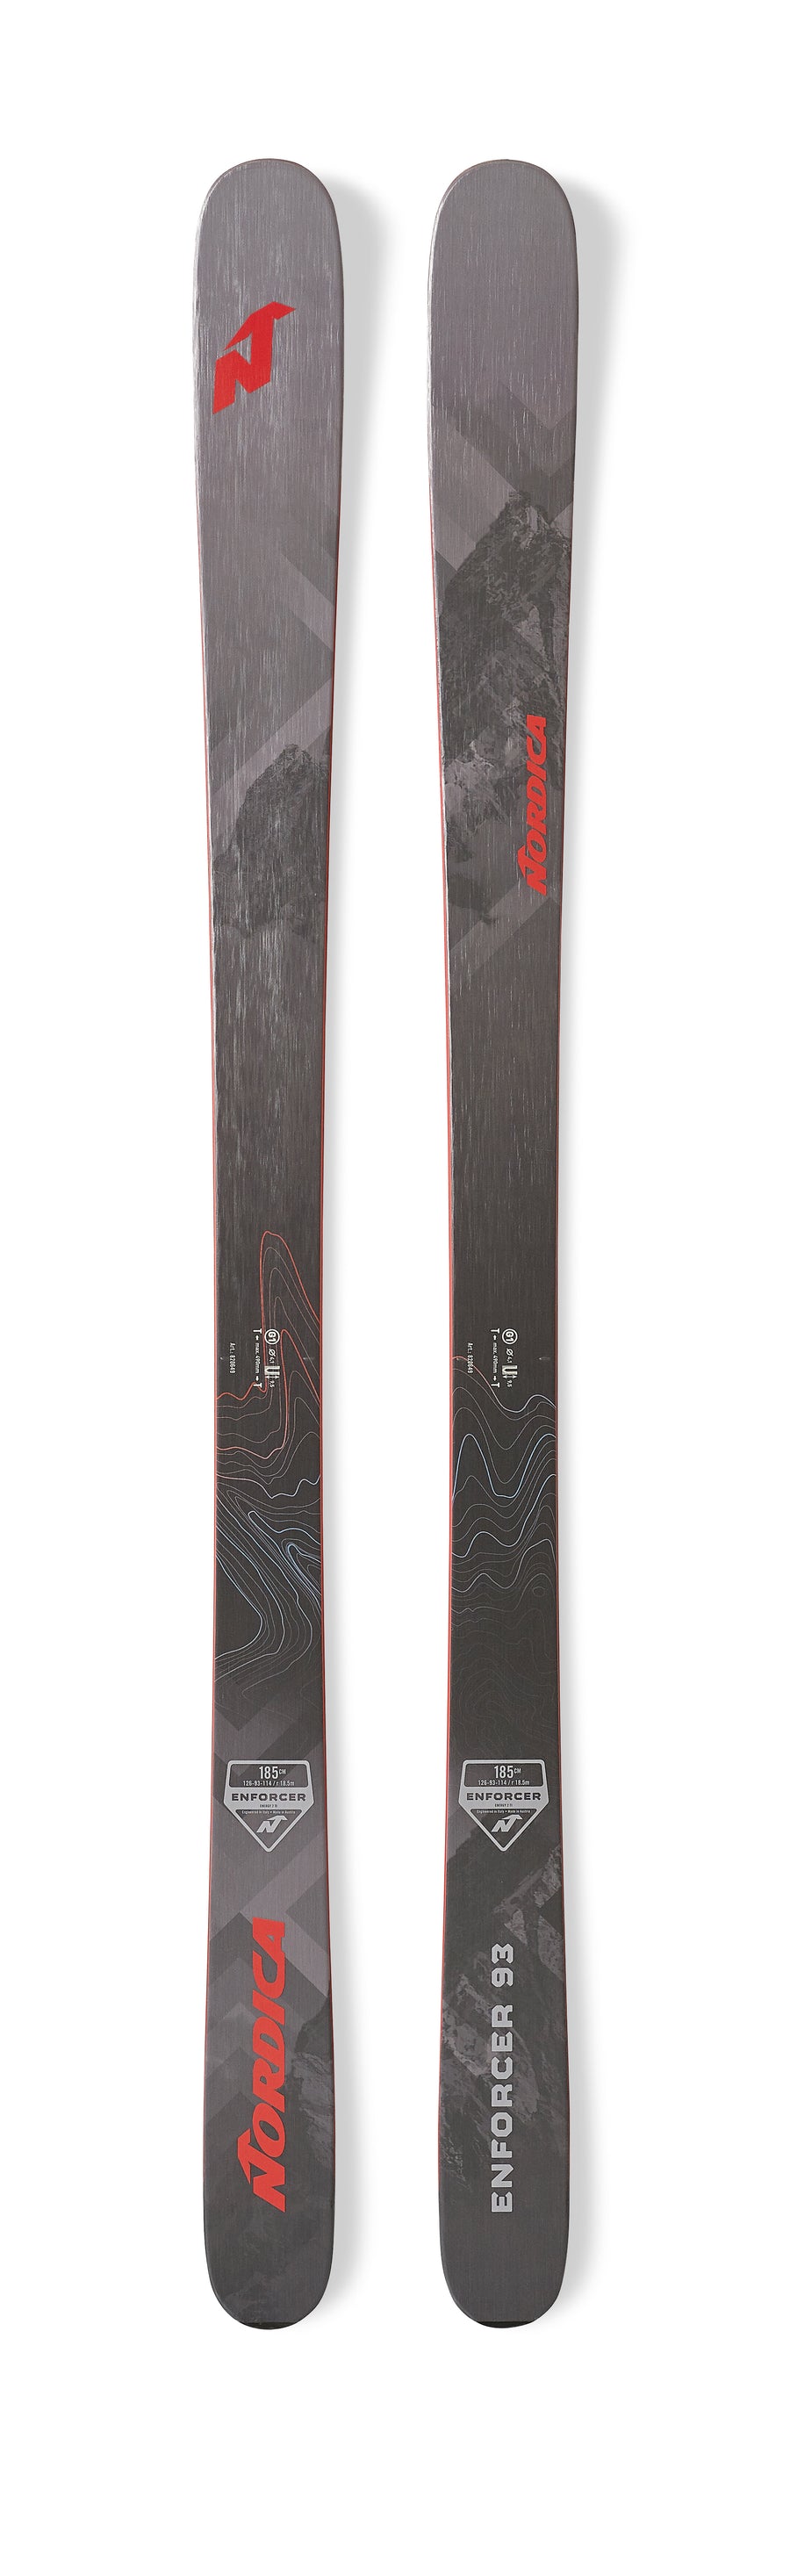 2020 Nordica Enforcer 93 - All Mountain Skis 